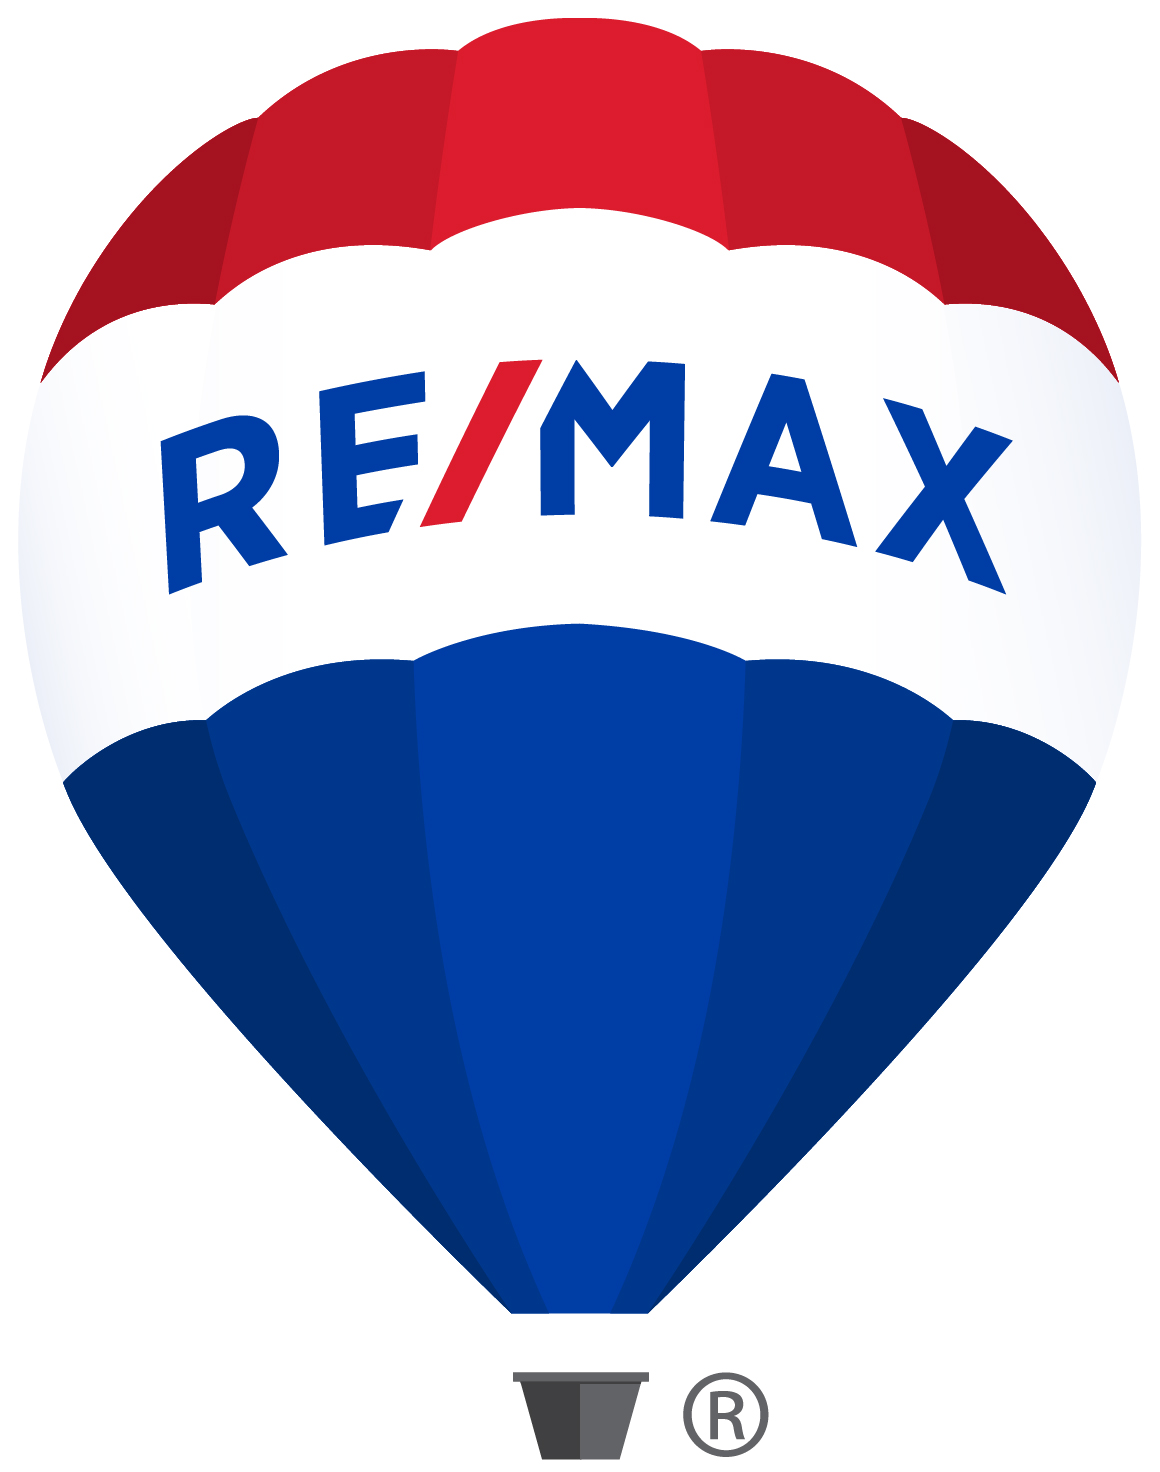 RE/MAX Real Estate Group